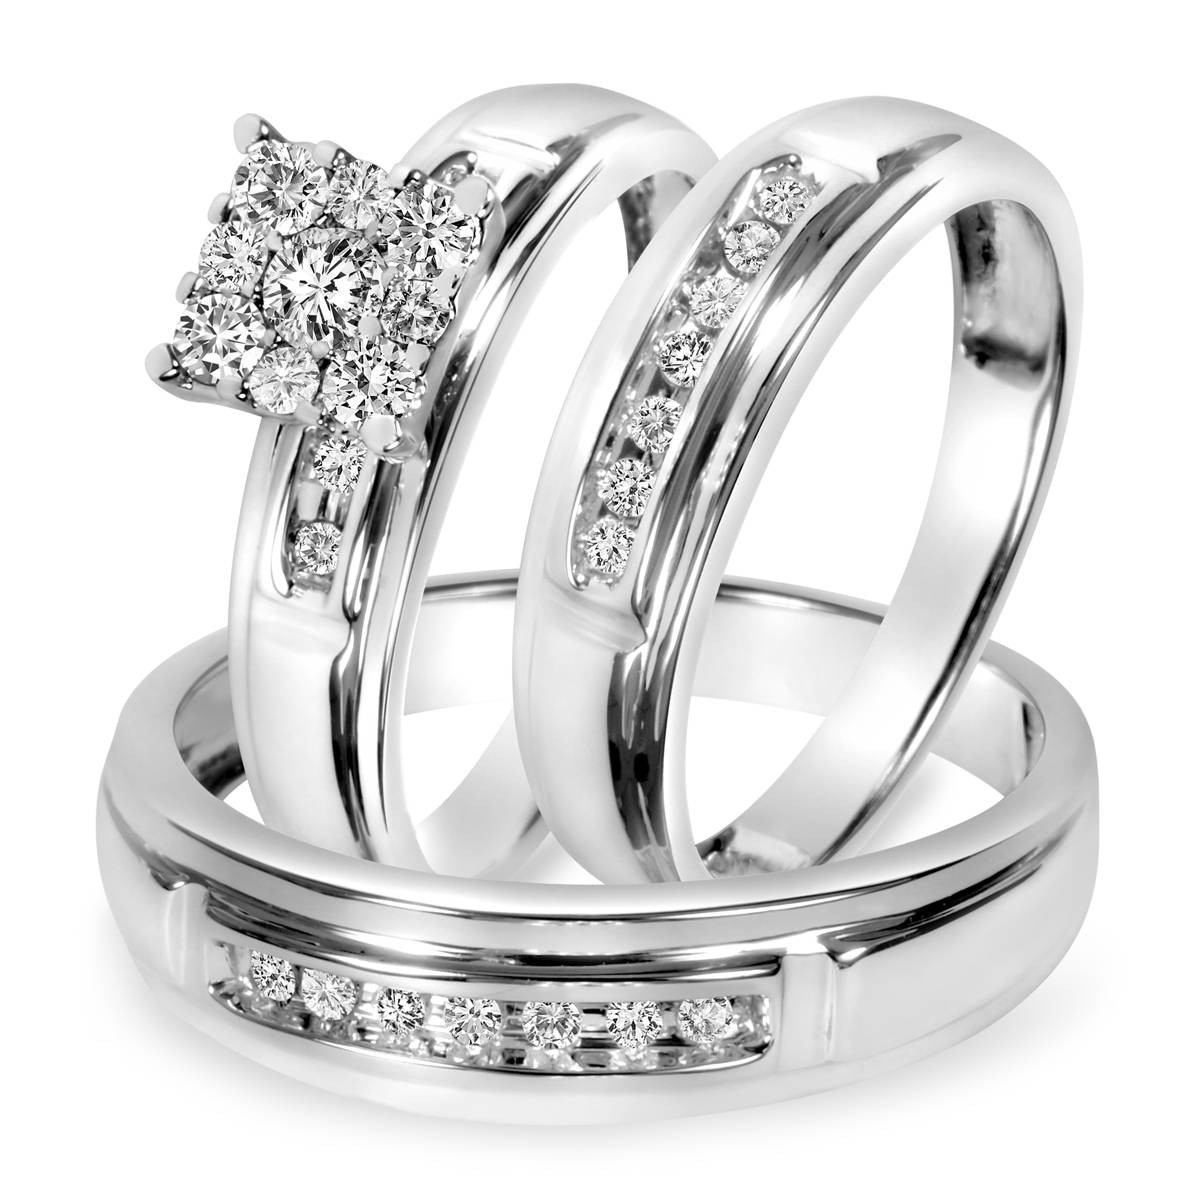 Wedding Rings Sets Cheap
 15 Inspirations of Cheap Wedding Bands Sets His And Hers